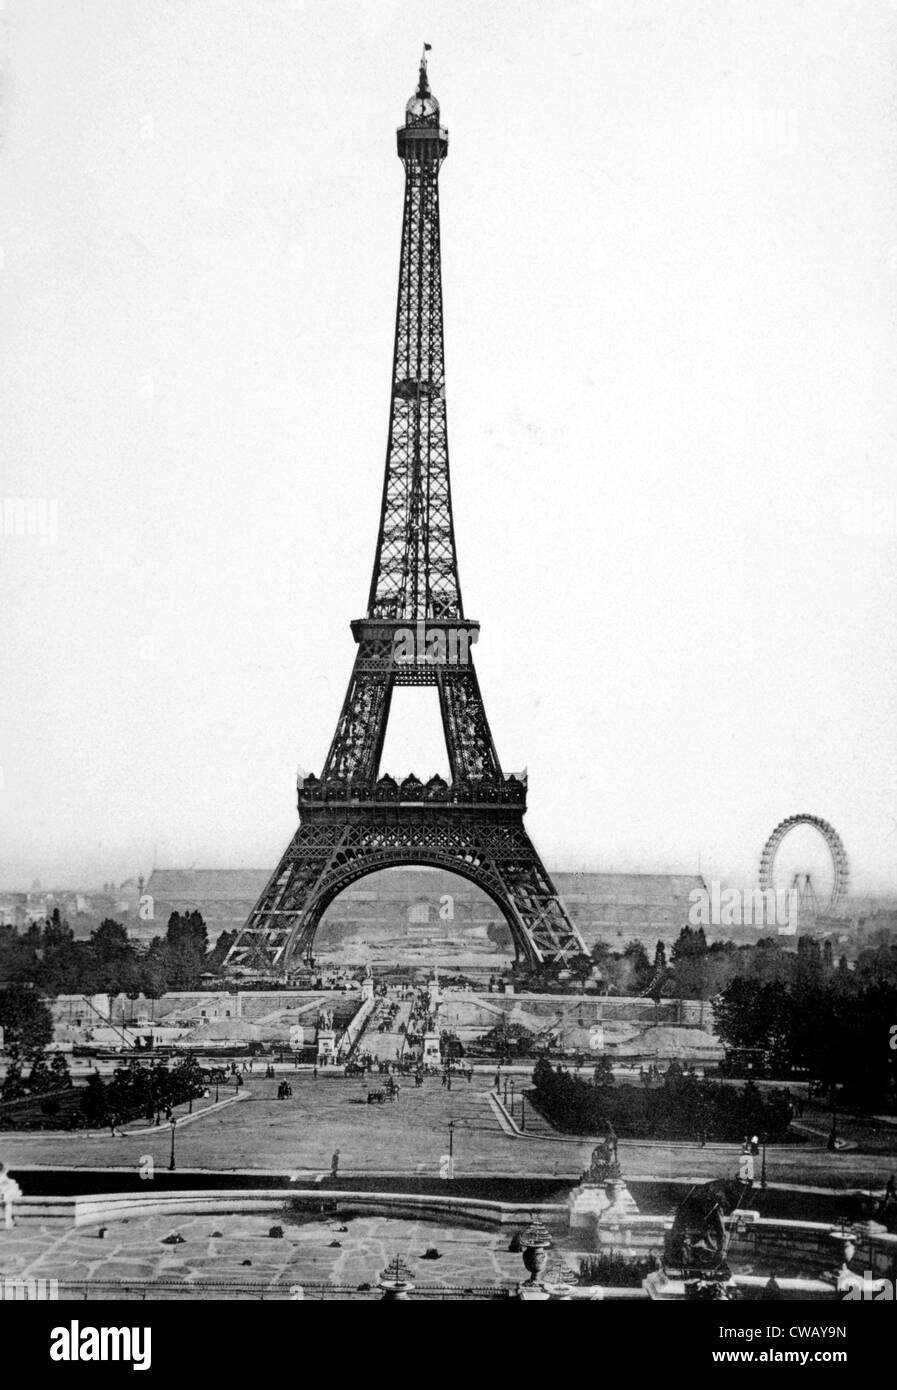 The Eiffel Tower with The Great Wheel of the Universal Exhibition in the background, c. 1900. Stock Photo